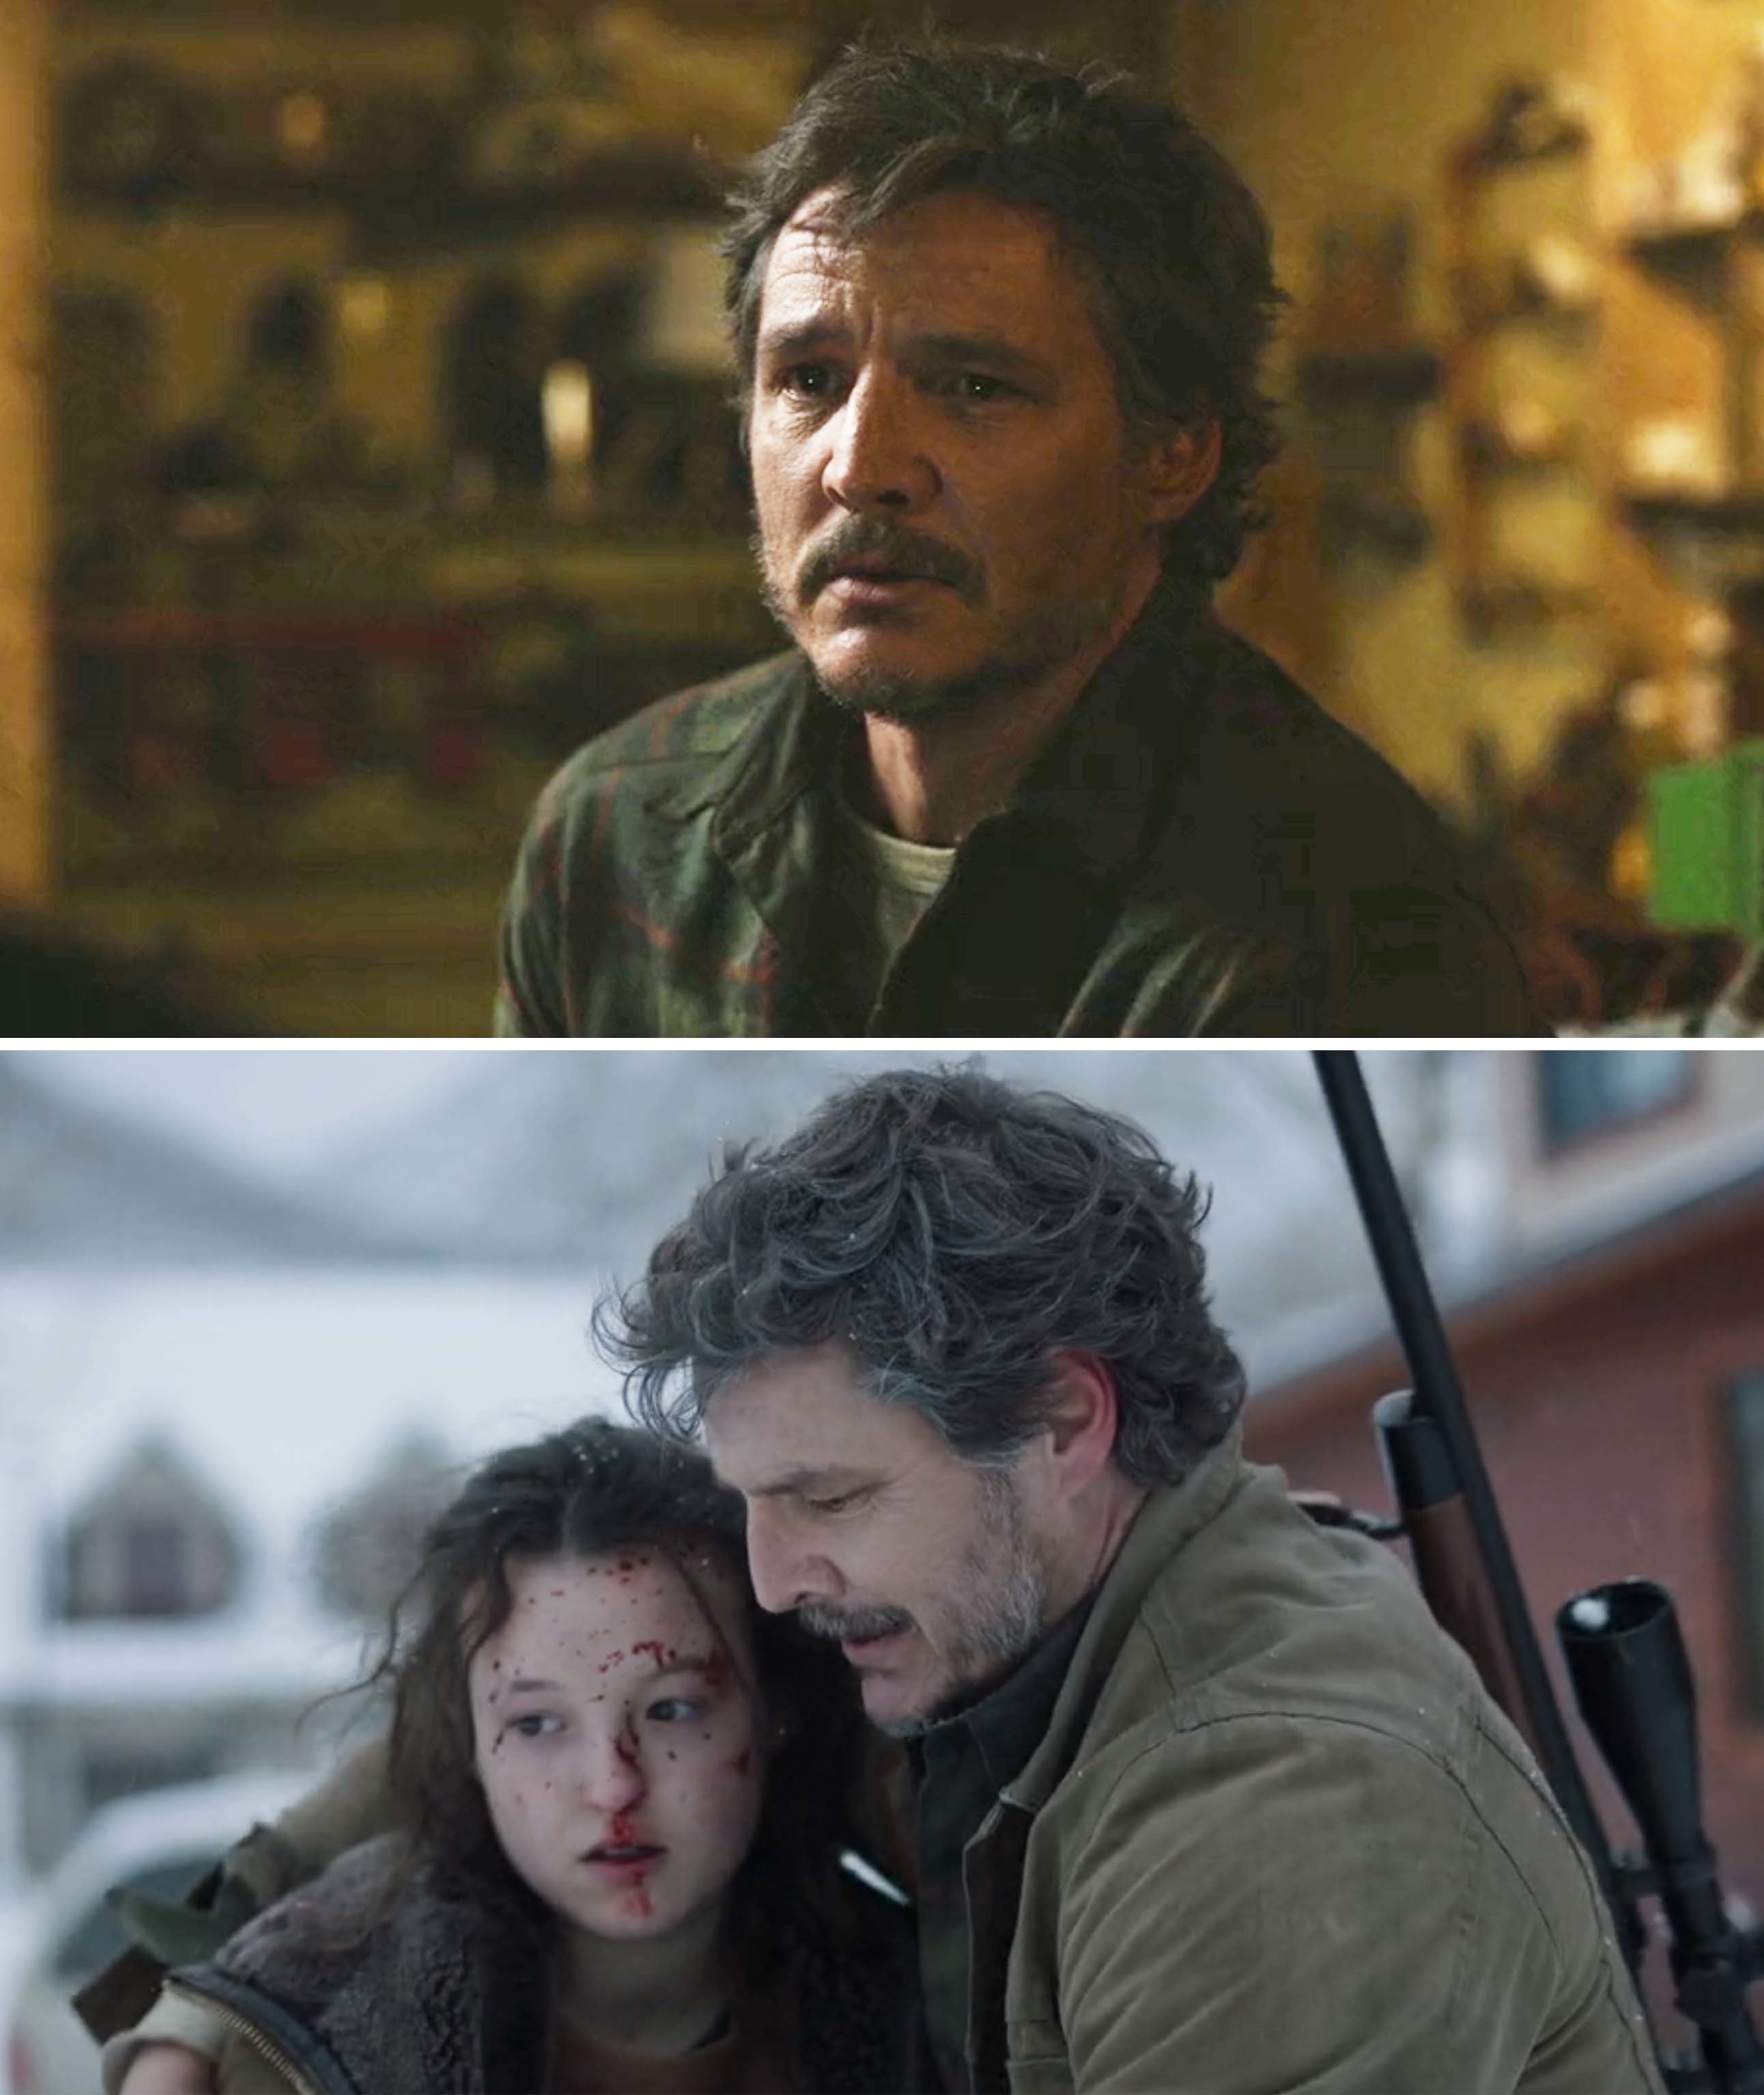 Pedro Pascal in two scenes: top as Joel in a worried look, bottom holding Bella Ramsey as Ellie, both in rugged outfits